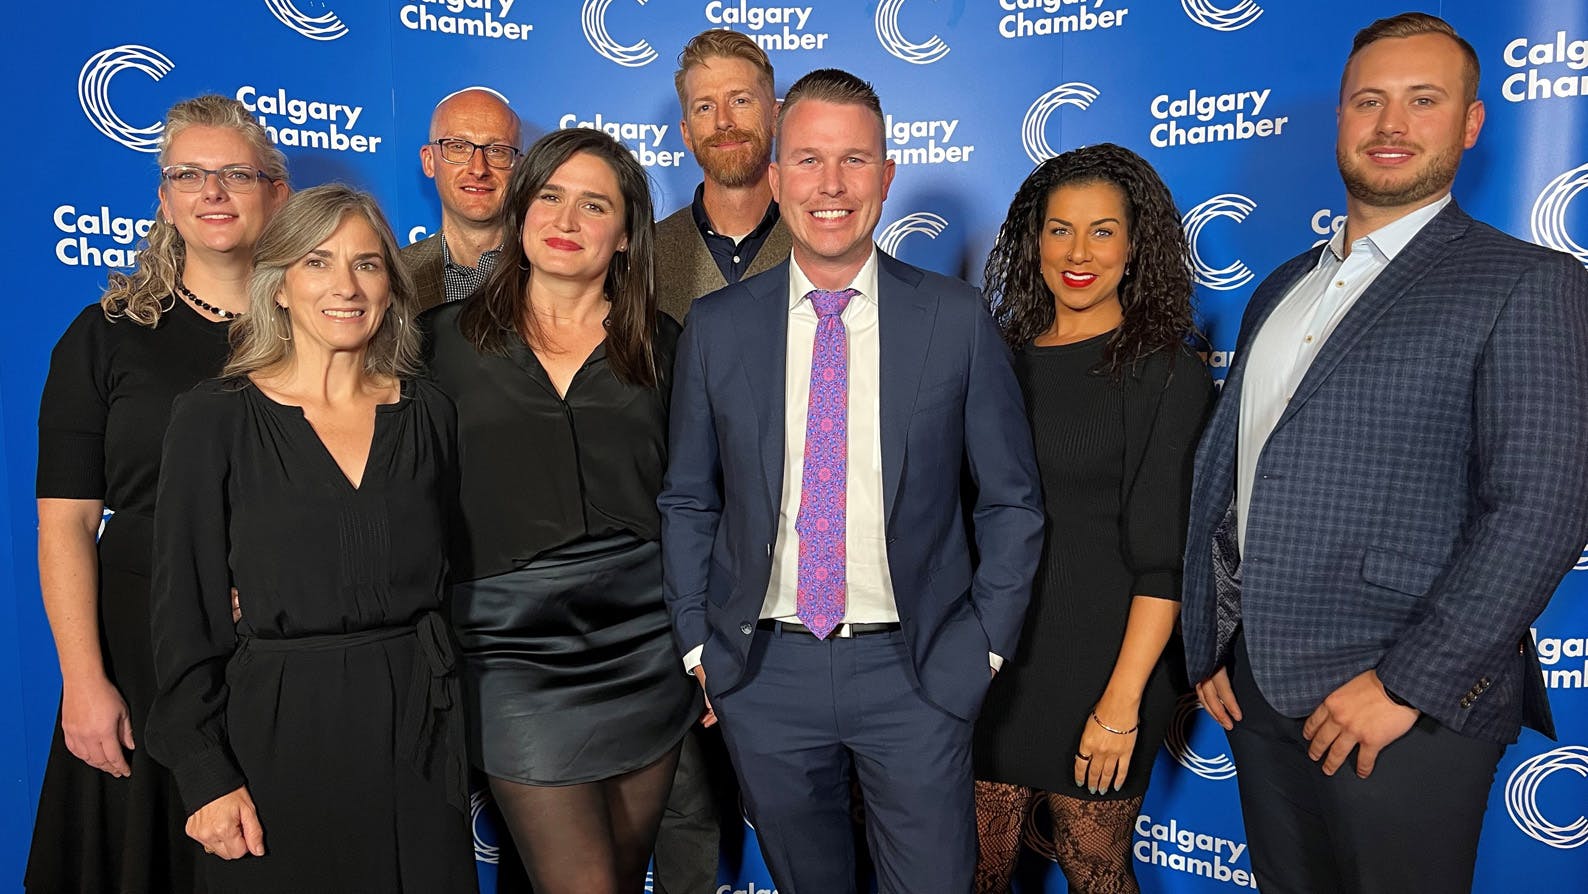 The Canadian Cannabis Exchange team posing after winning the Helcim Emerging Growth award at the Small Business Awards in 2022.